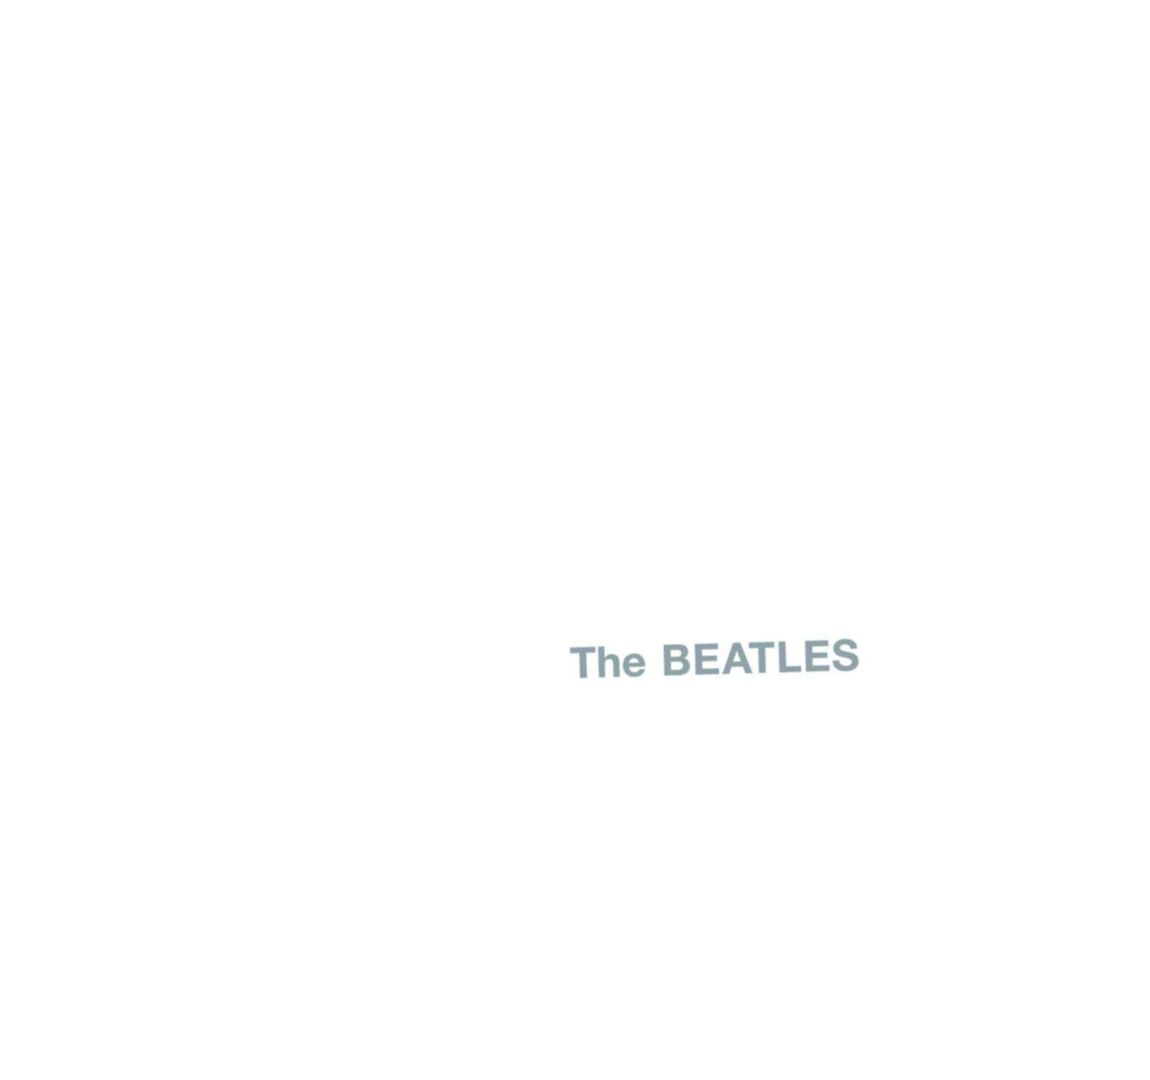 The Beatles - THE BEATLES (1968)